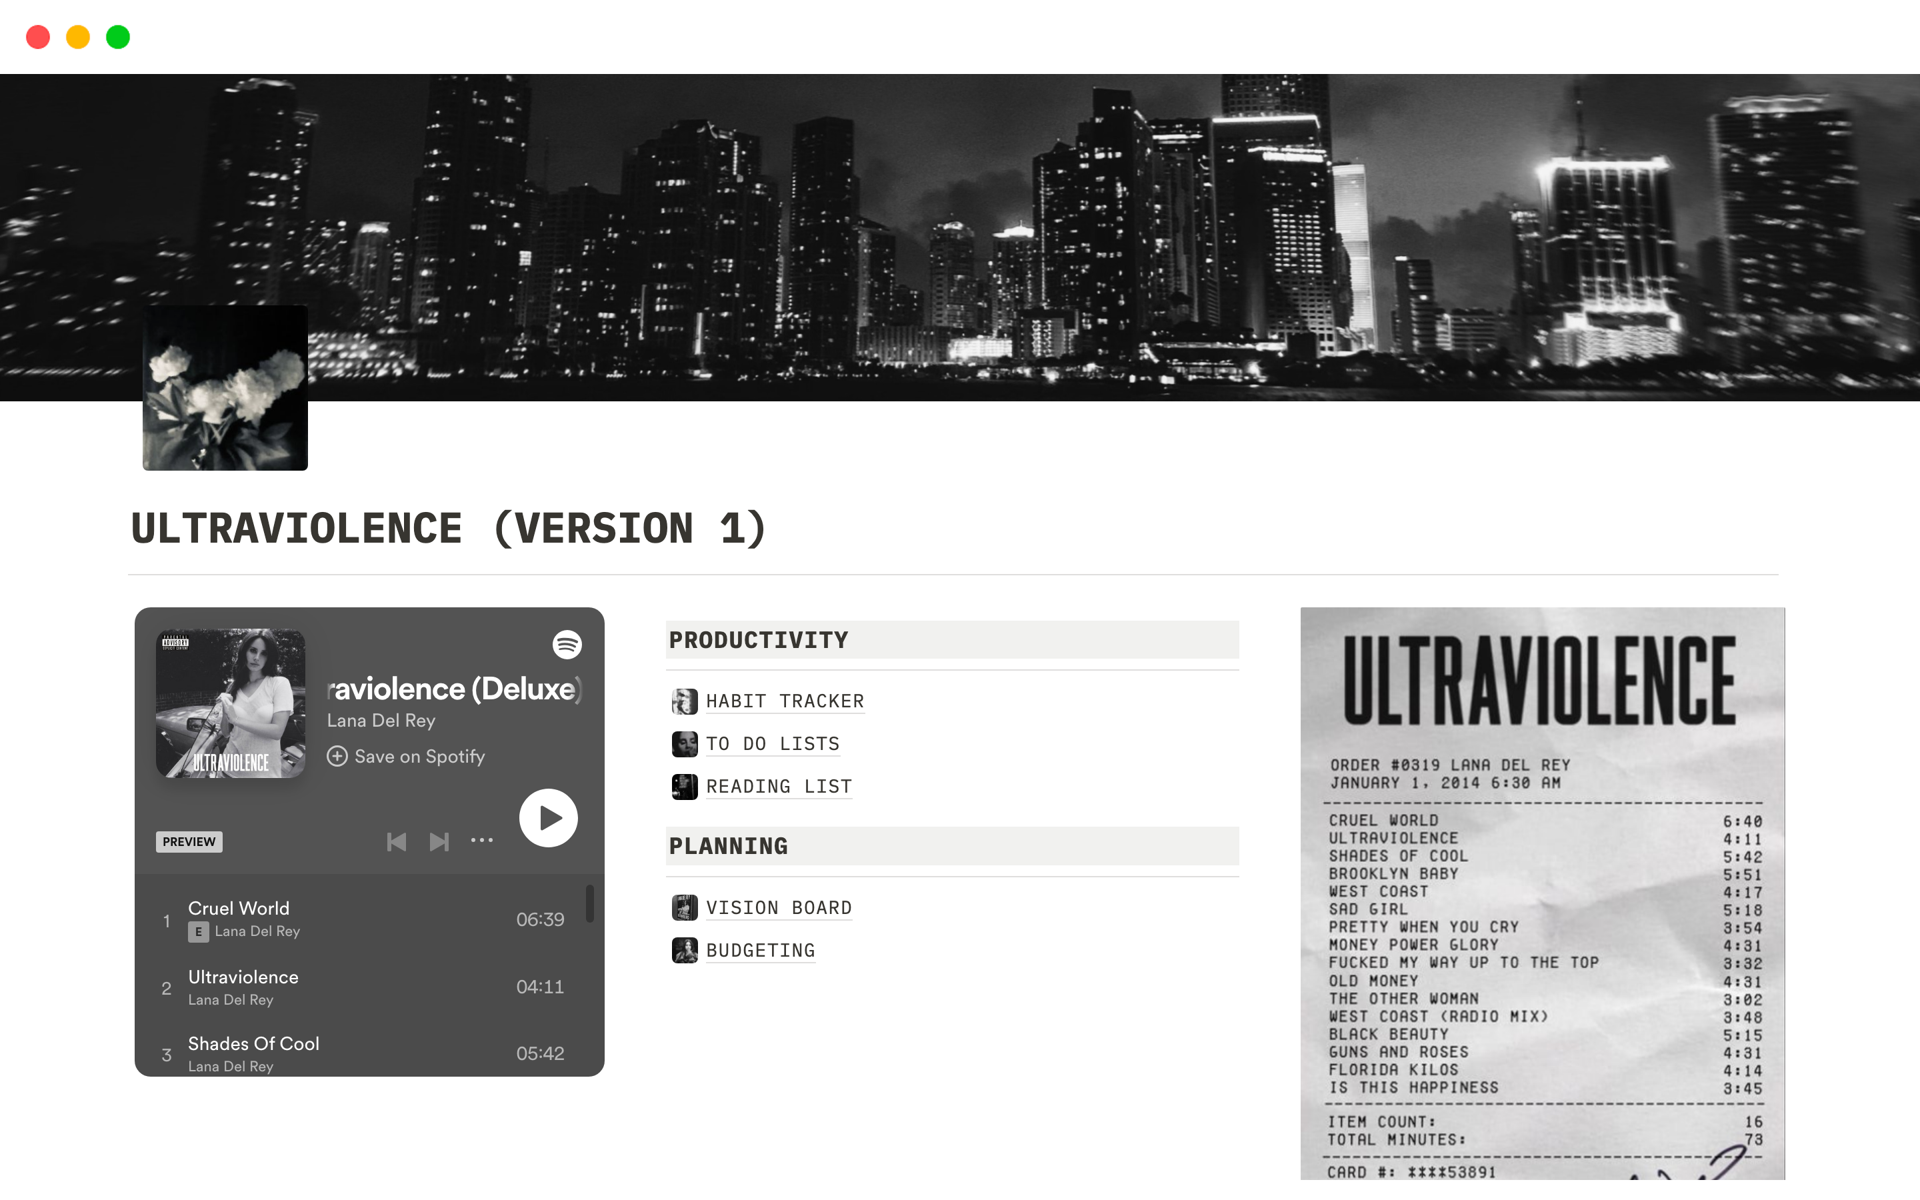 Lana Del Rey's Ultraviolence Notion Template. Available in Dark and Light Mode!